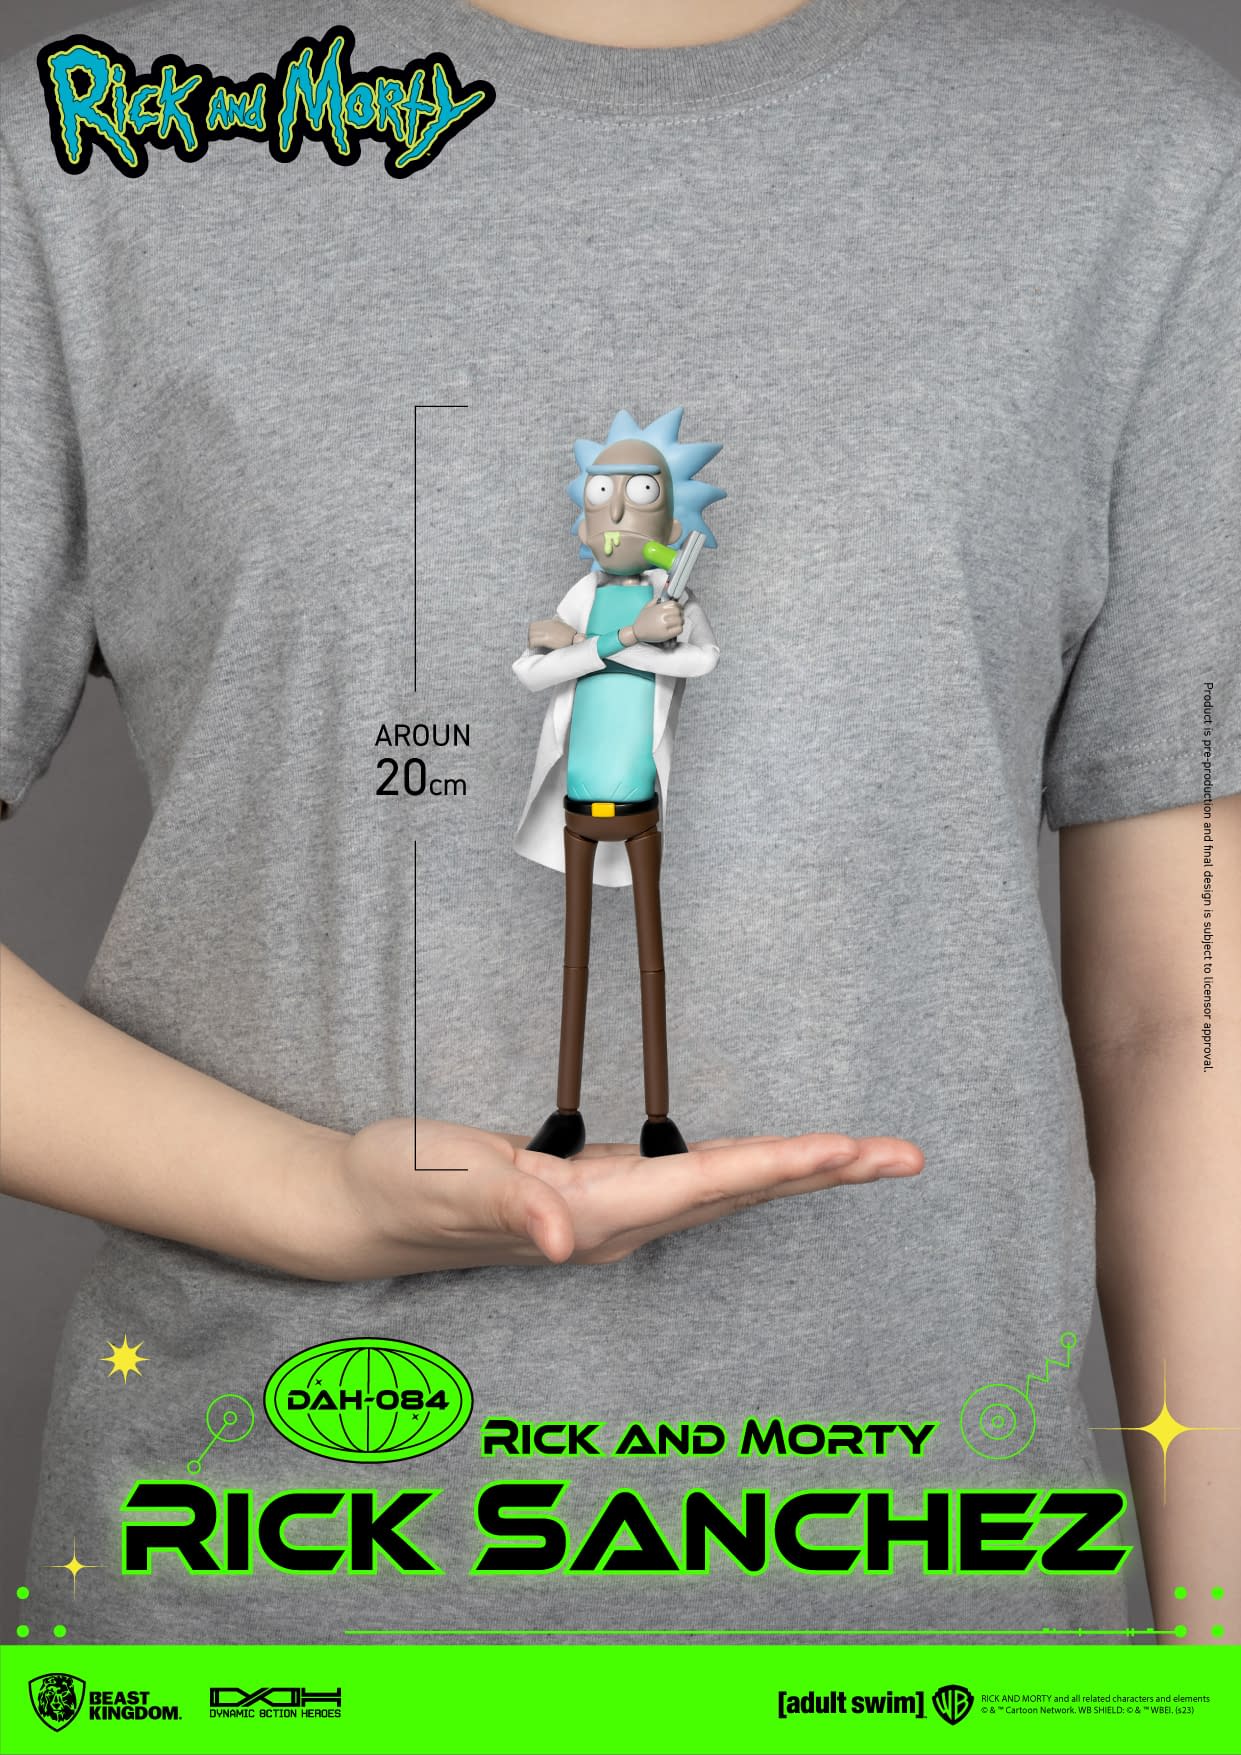 Morty Smith Goes Solo with Beast Kingdom's Rick and Morty DAH Line